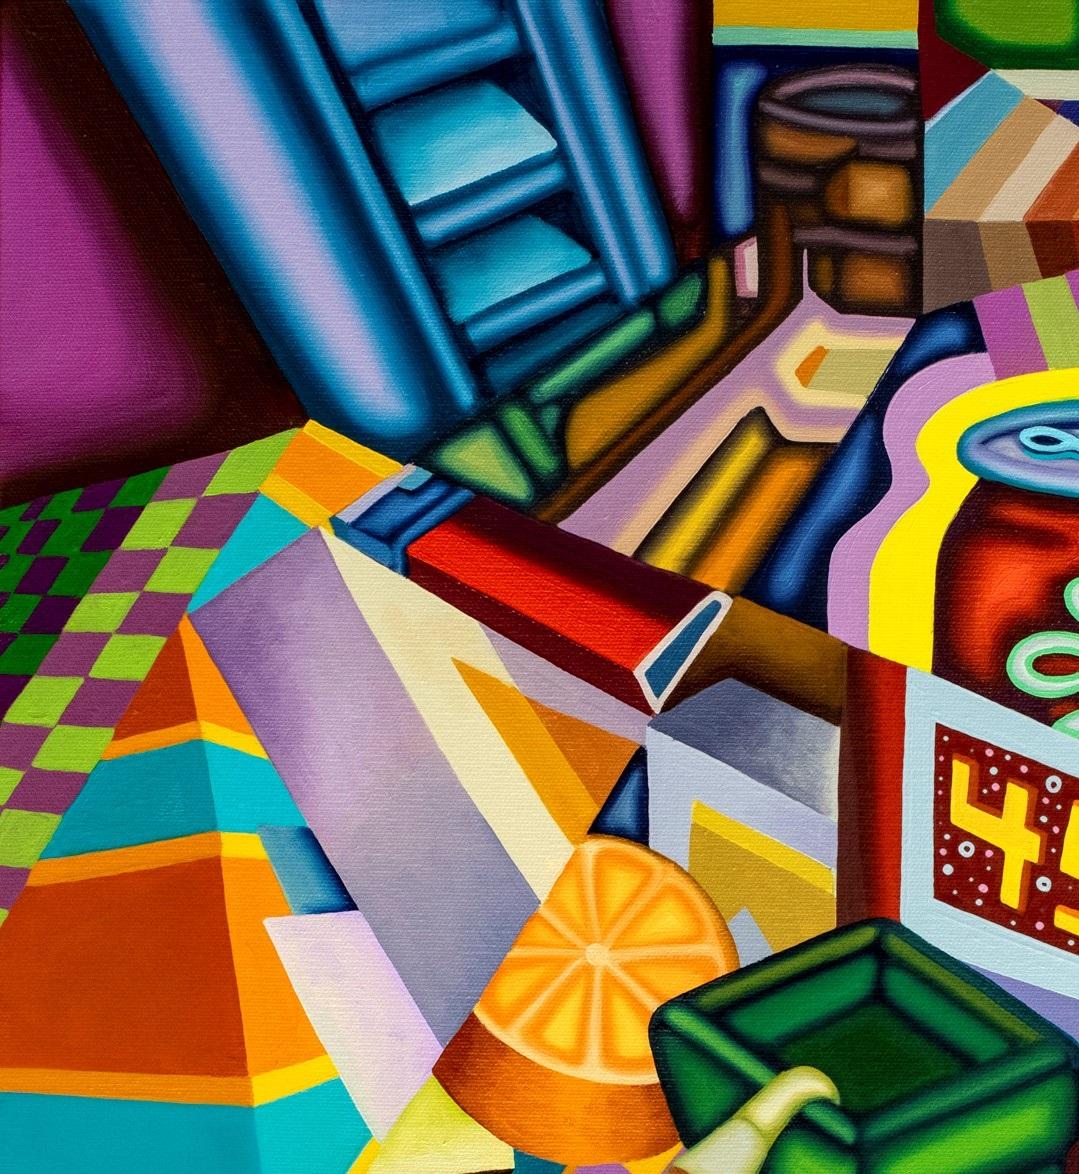 45 OLé COLLAPSE- Cubist, Surreal Still Life with Bold Colors, Beer Can, Orange - Painting by Jason Stout